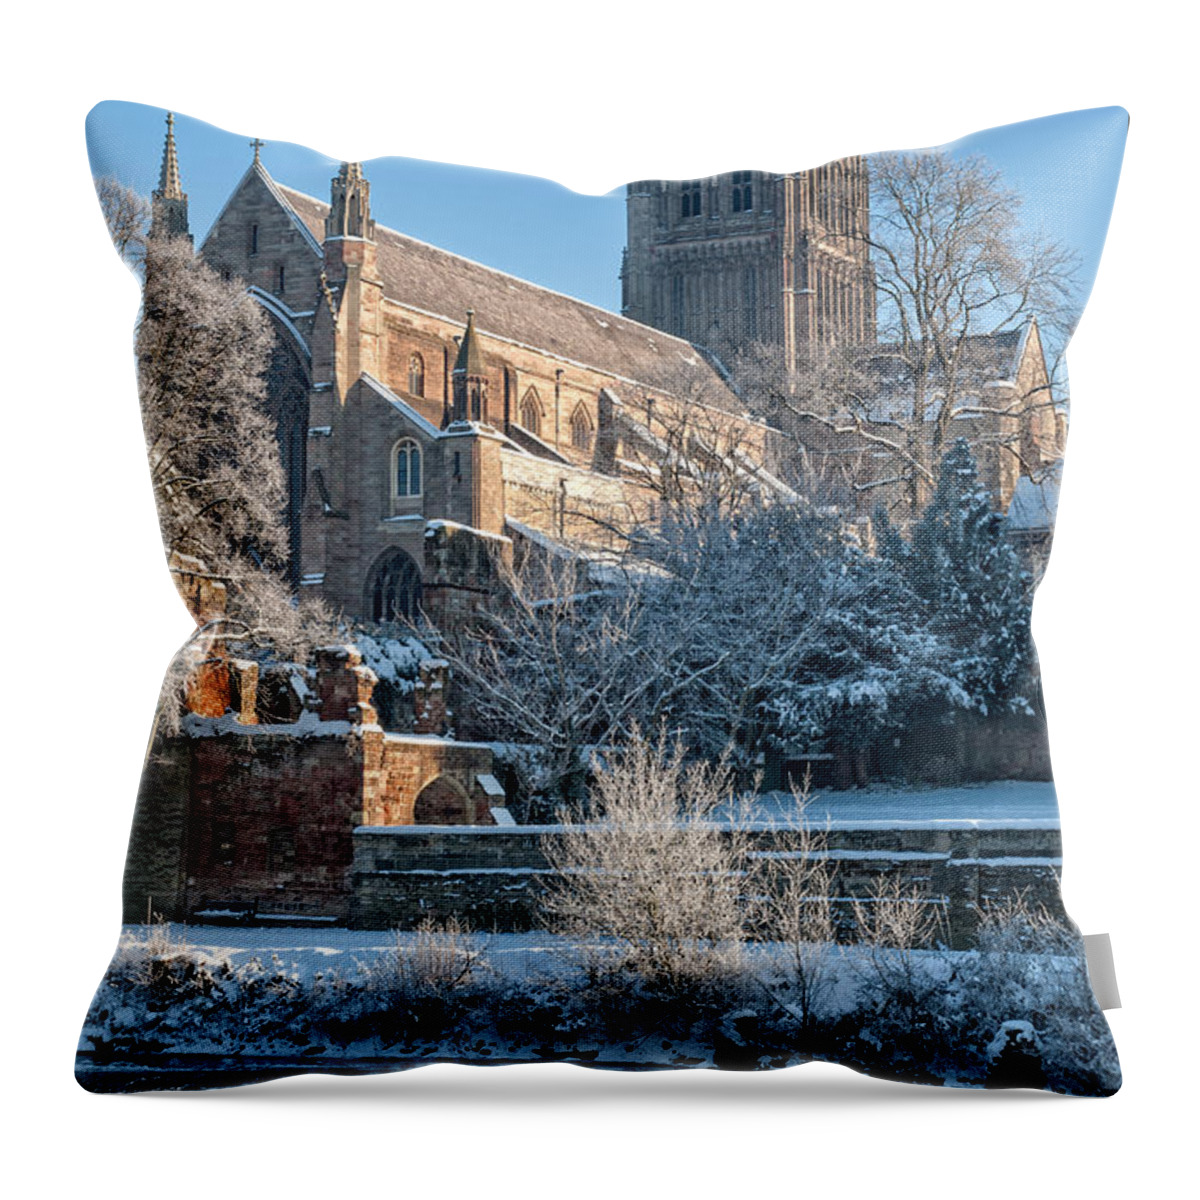 Cathedral Throw Pillow featuring the photograph Christmas Card Church by Roy Pedersen